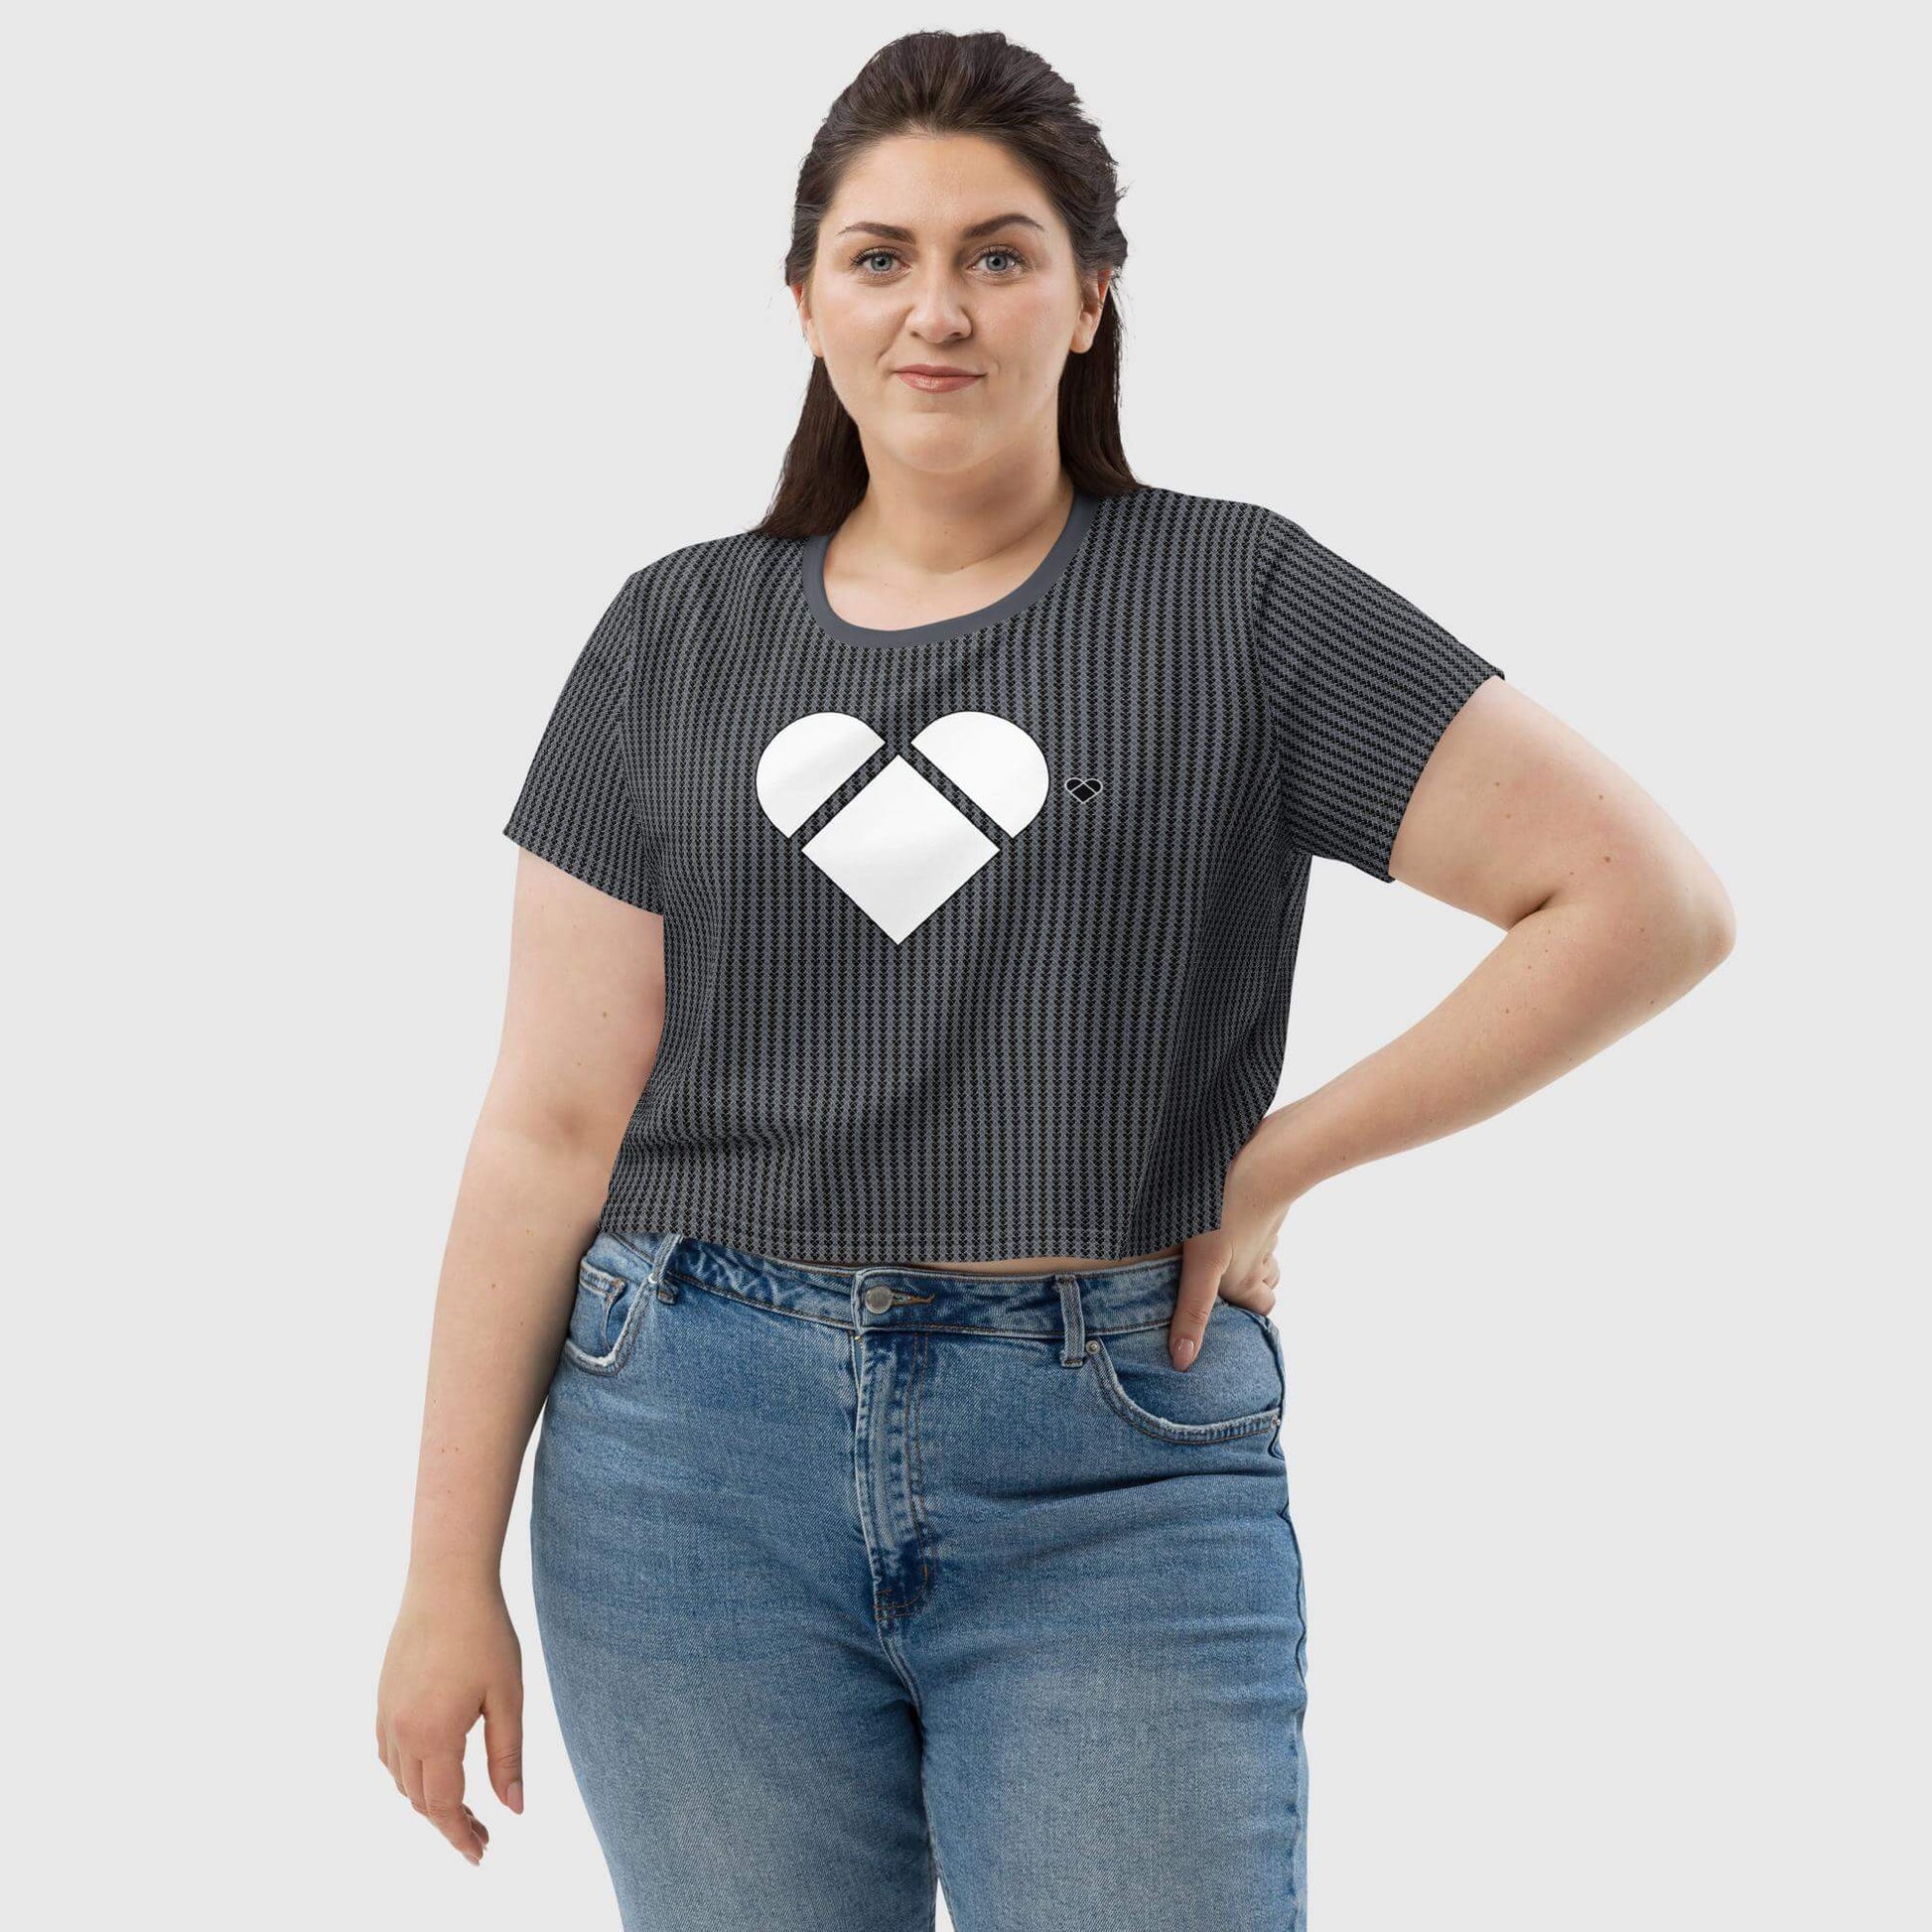 omen's Black Crop Tee with a unique pattern of little heart-shaped geometrical logos and a big white heart in front from the Amor Primero collection by CRiZ AMOR, front view